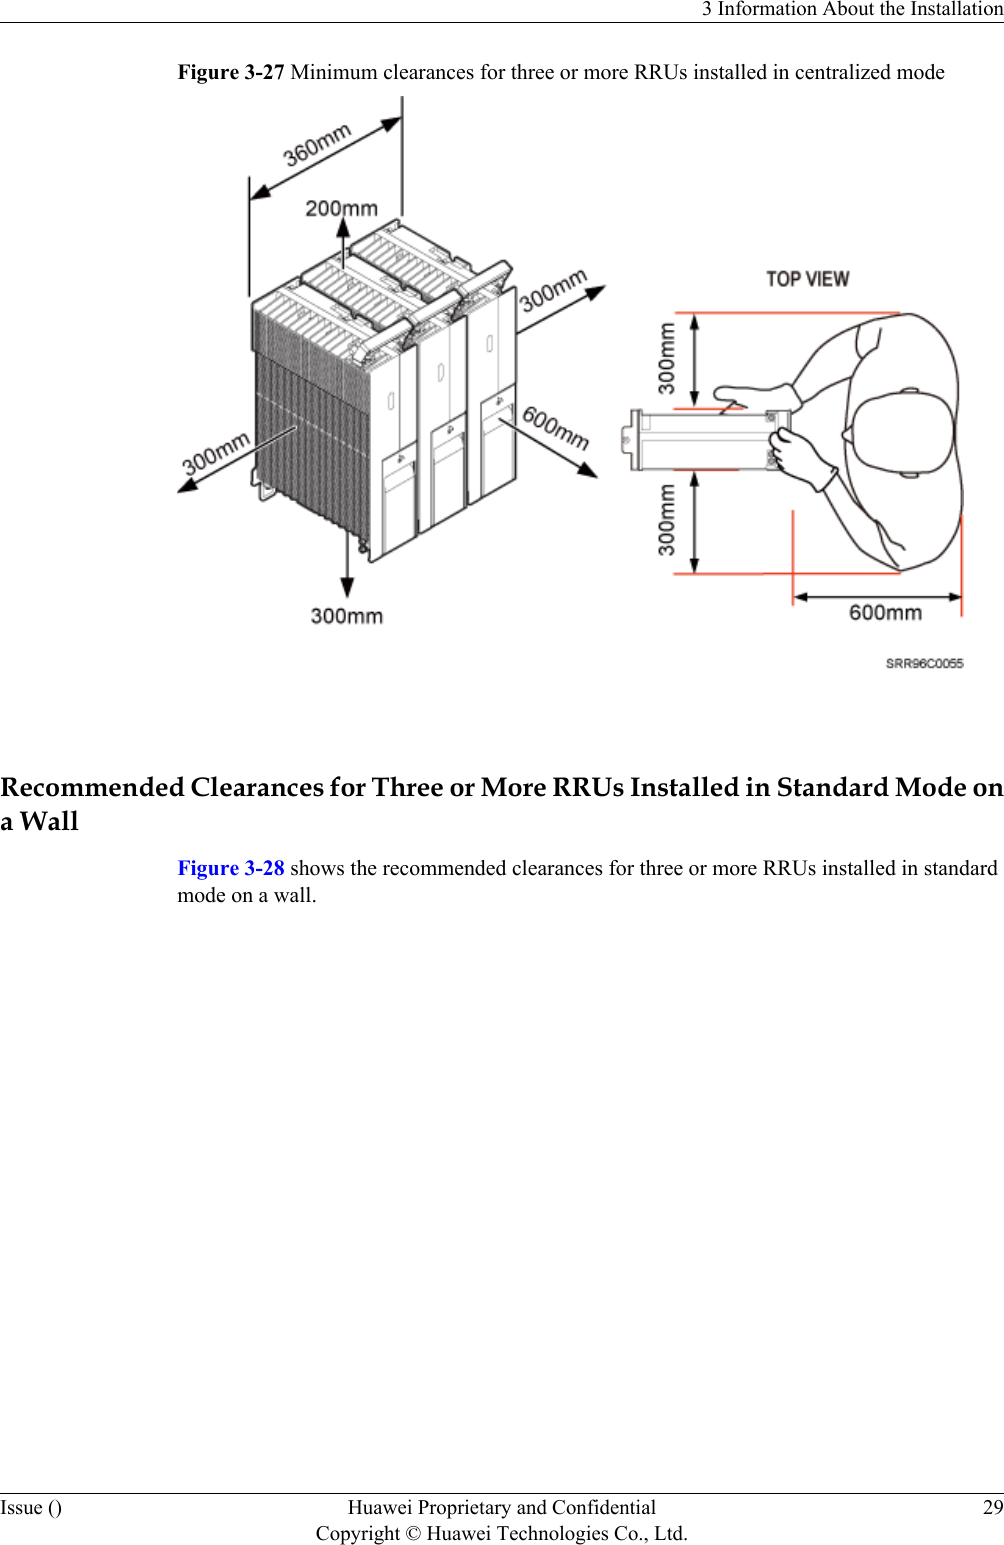 Figure 3-27 Minimum clearances for three or more RRUs installed in centralized mode Recommended Clearances for Three or More RRUs Installed in Standard Mode ona WallFigure 3-28 shows the recommended clearances for three or more RRUs installed in standardmode on a wall.3 Information About the InstallationIssue () Huawei Proprietary and ConfidentialCopyright © Huawei Technologies Co., Ltd.29